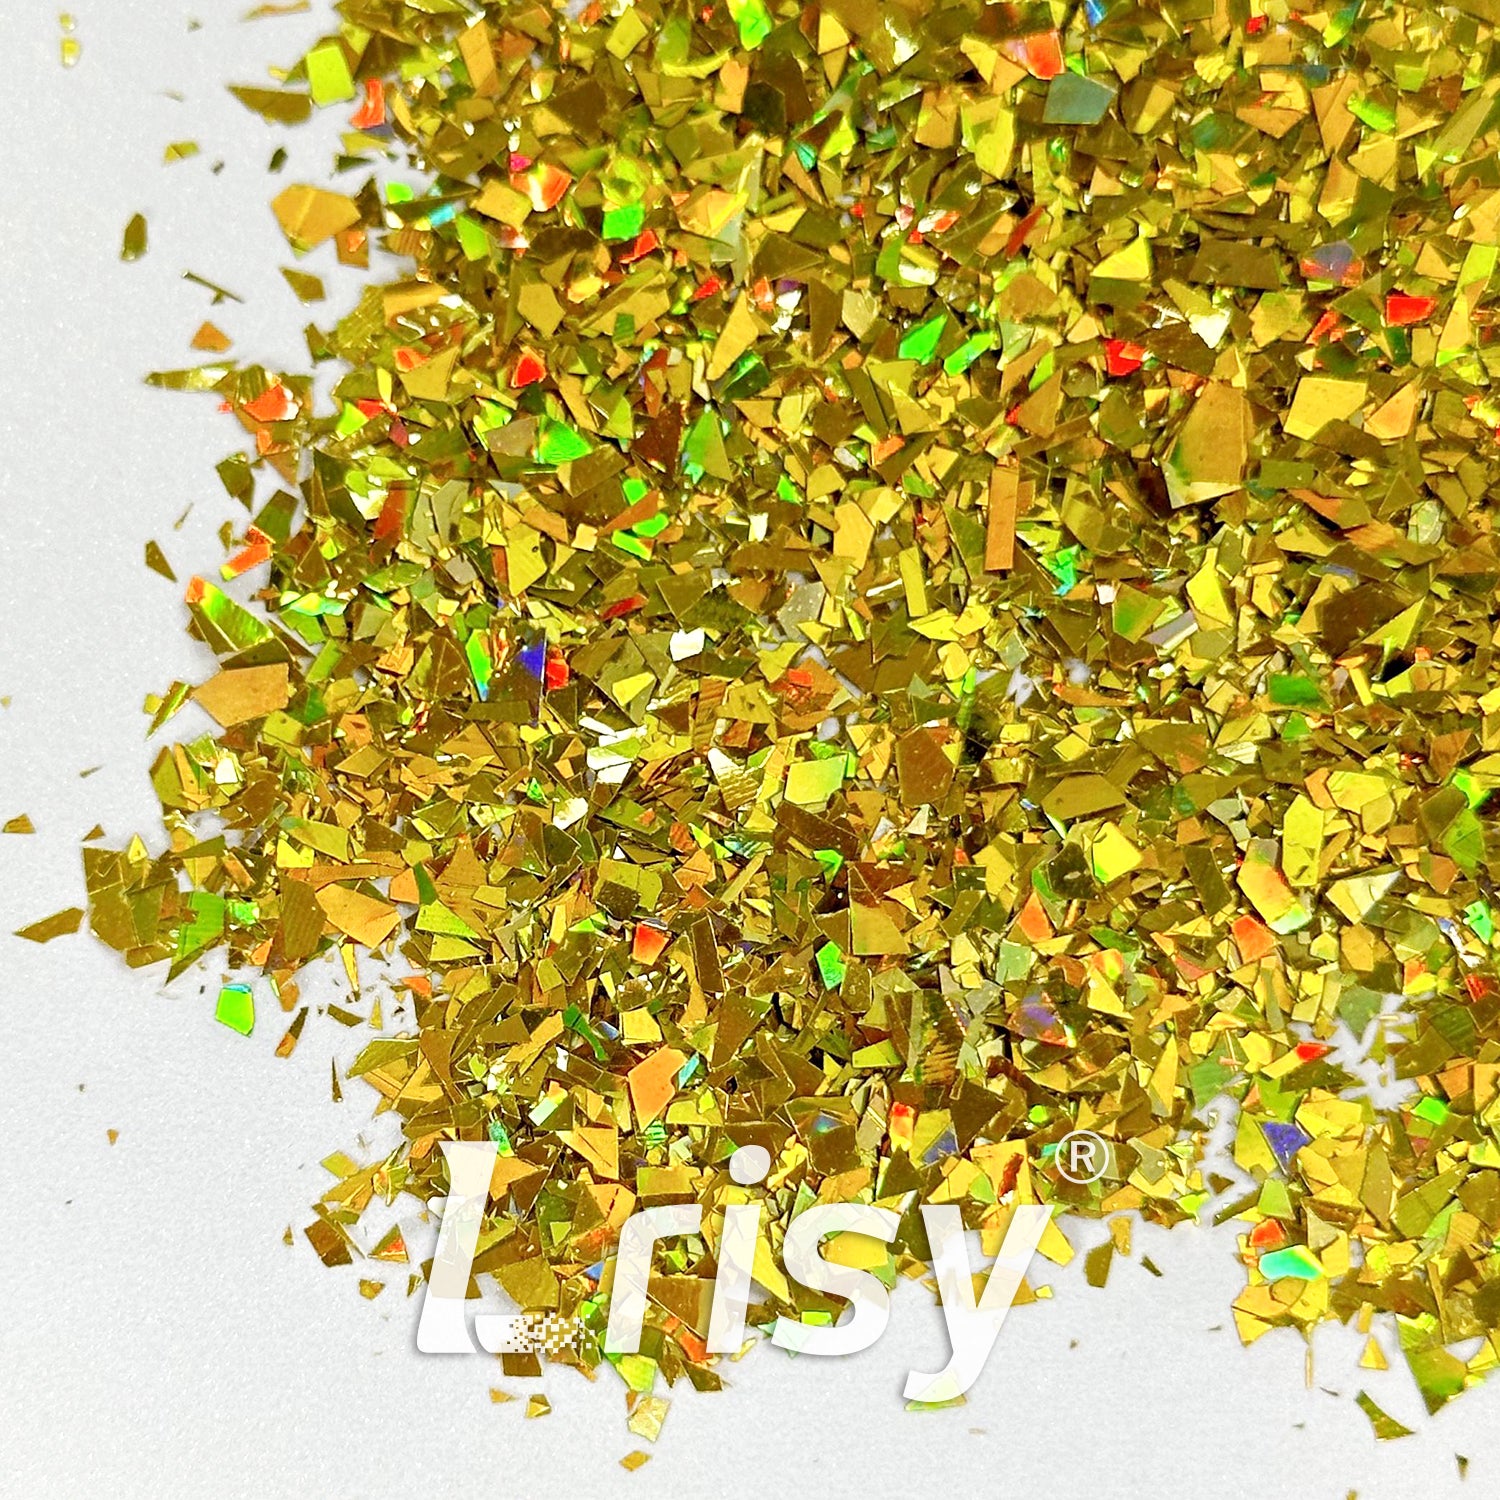 Holographic Gold Cellophane Glitter Flakes Holo Shards LB0210 4x4